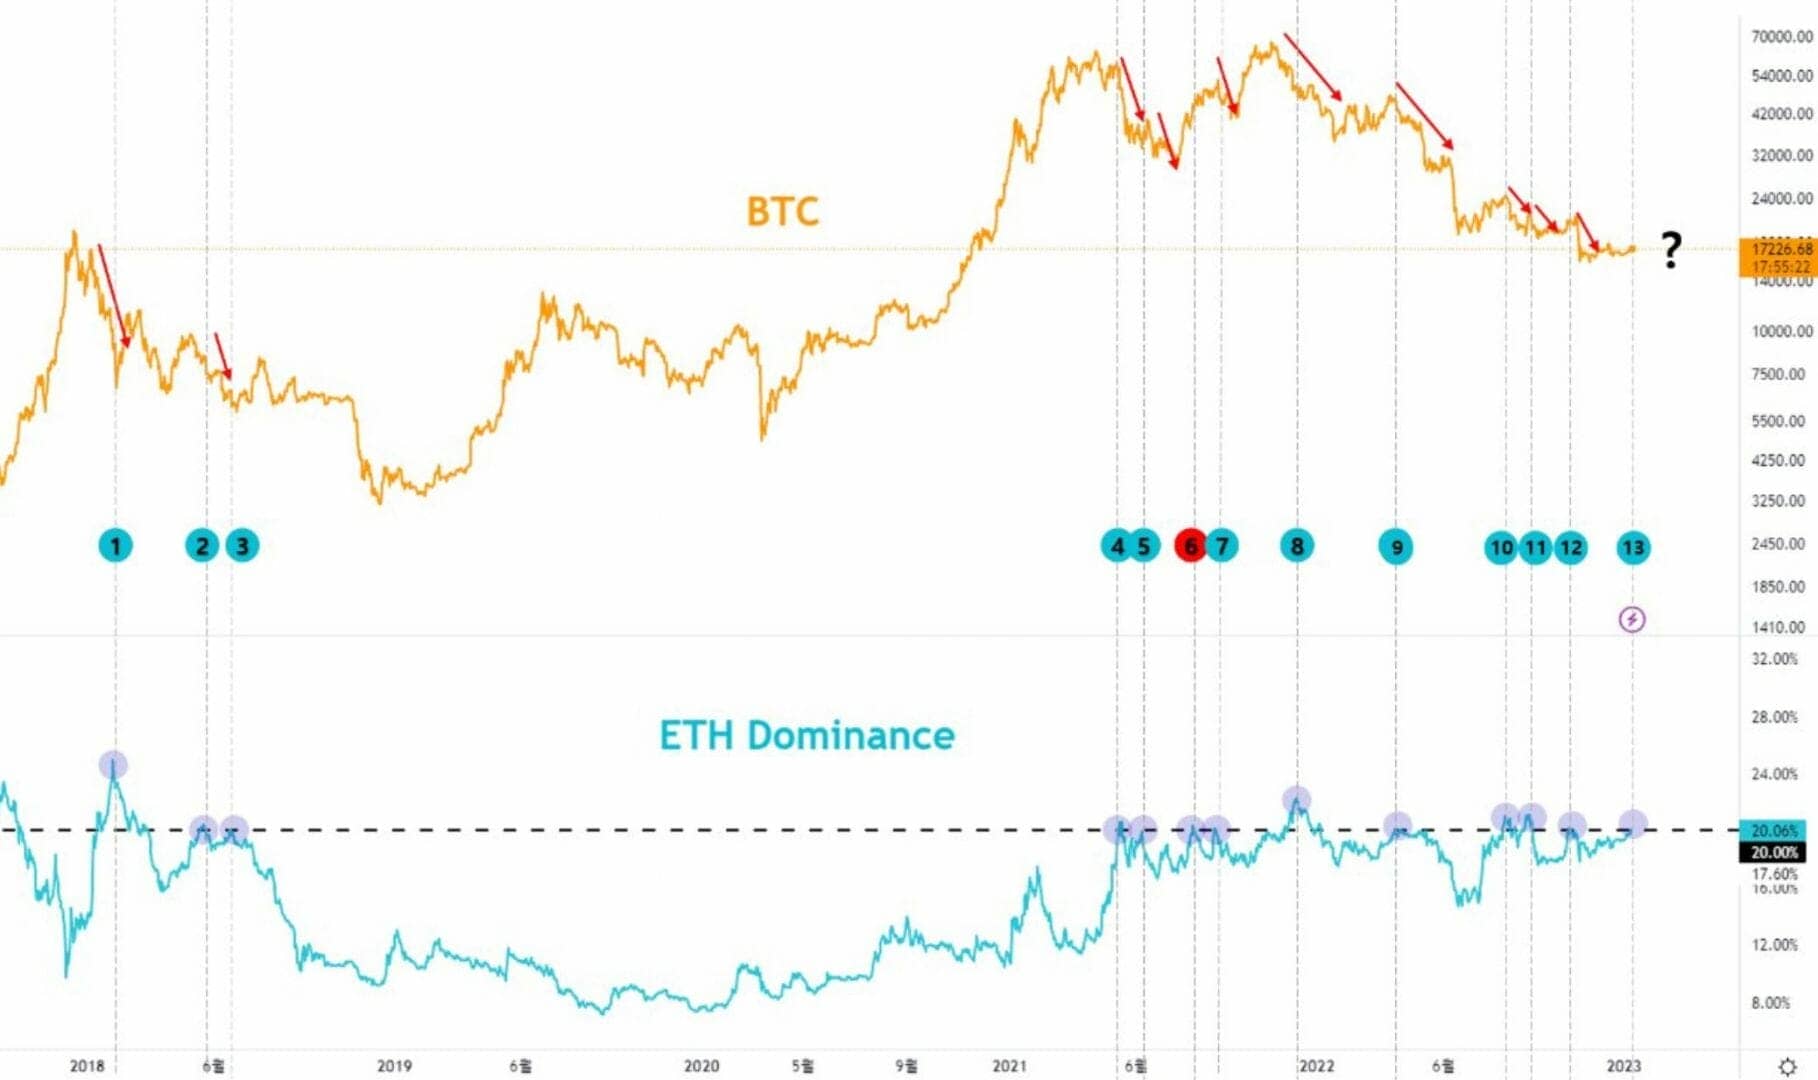 Ethereum dominance is at significant resistance.